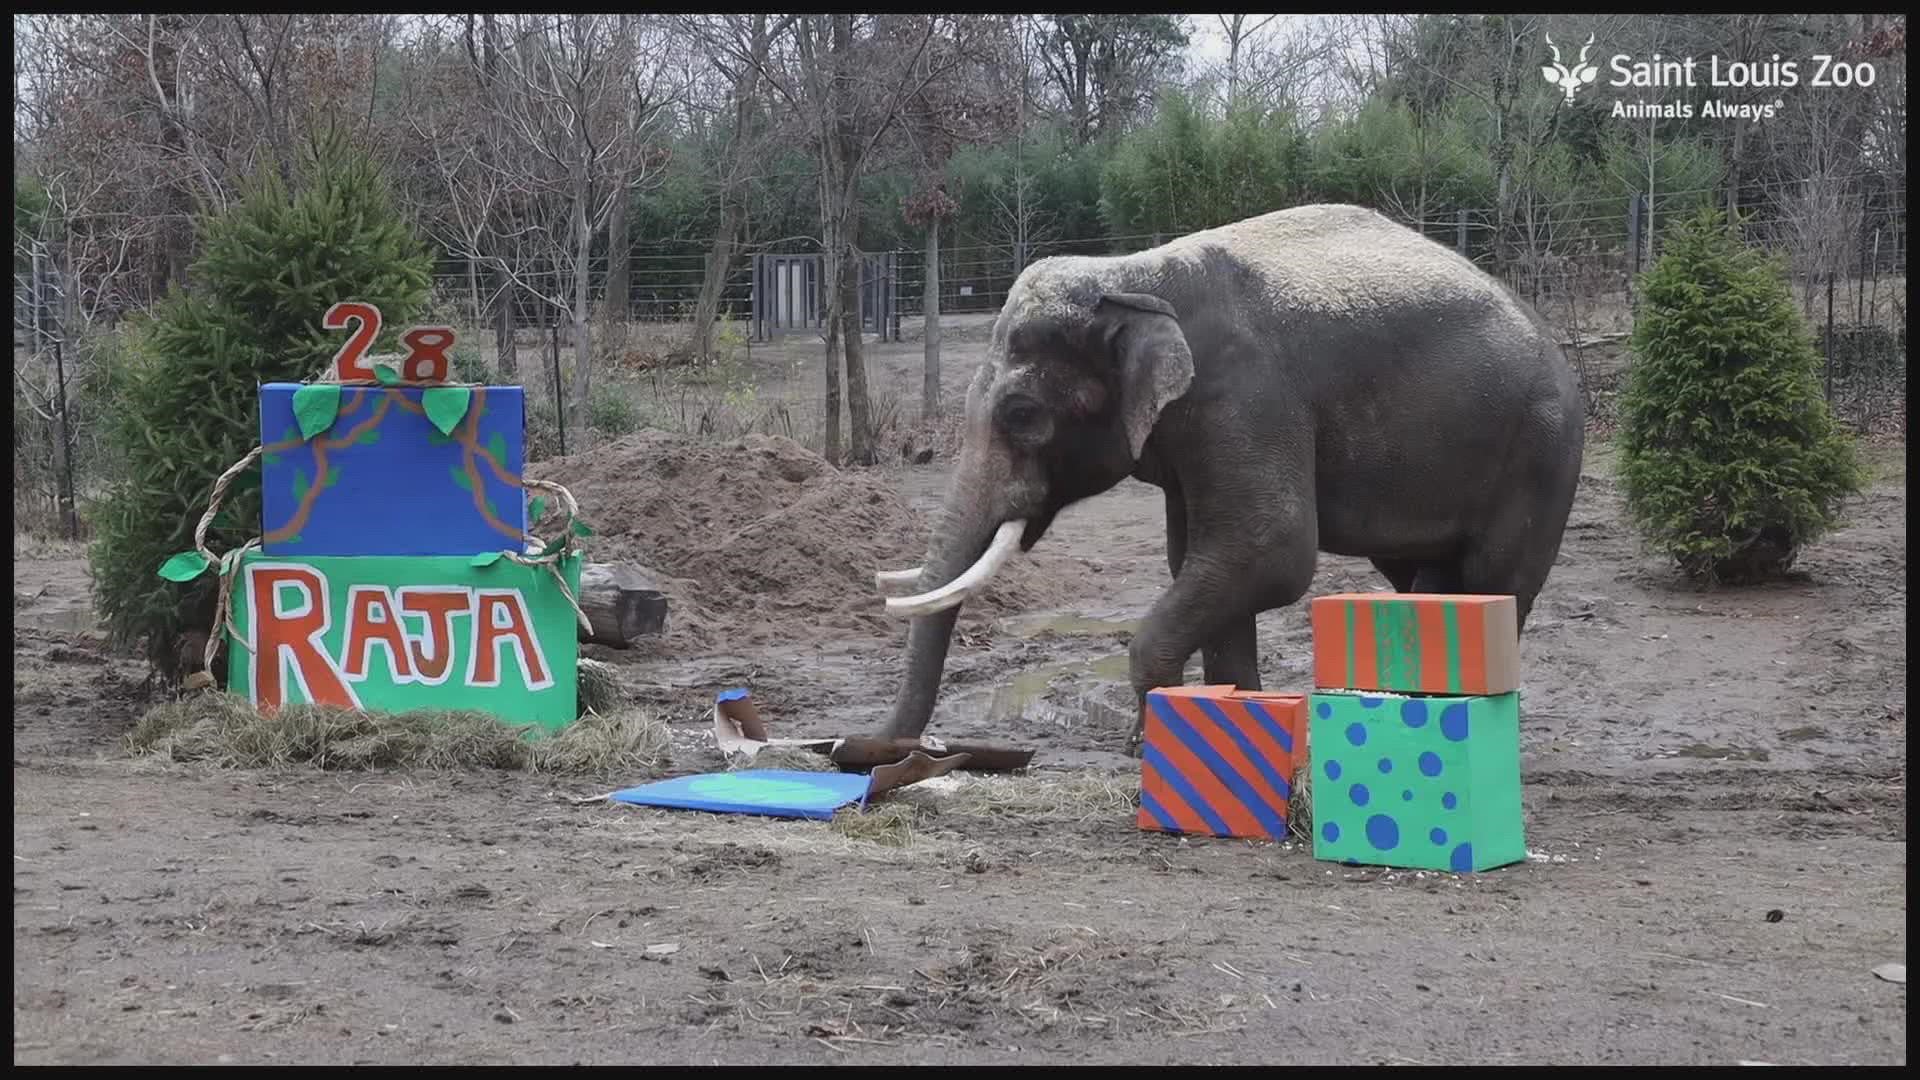 Zoo officials said weather conditions are forcing them to keep the elephants inside. Raja's last two birthday celebrations were held virtually due to COVID.